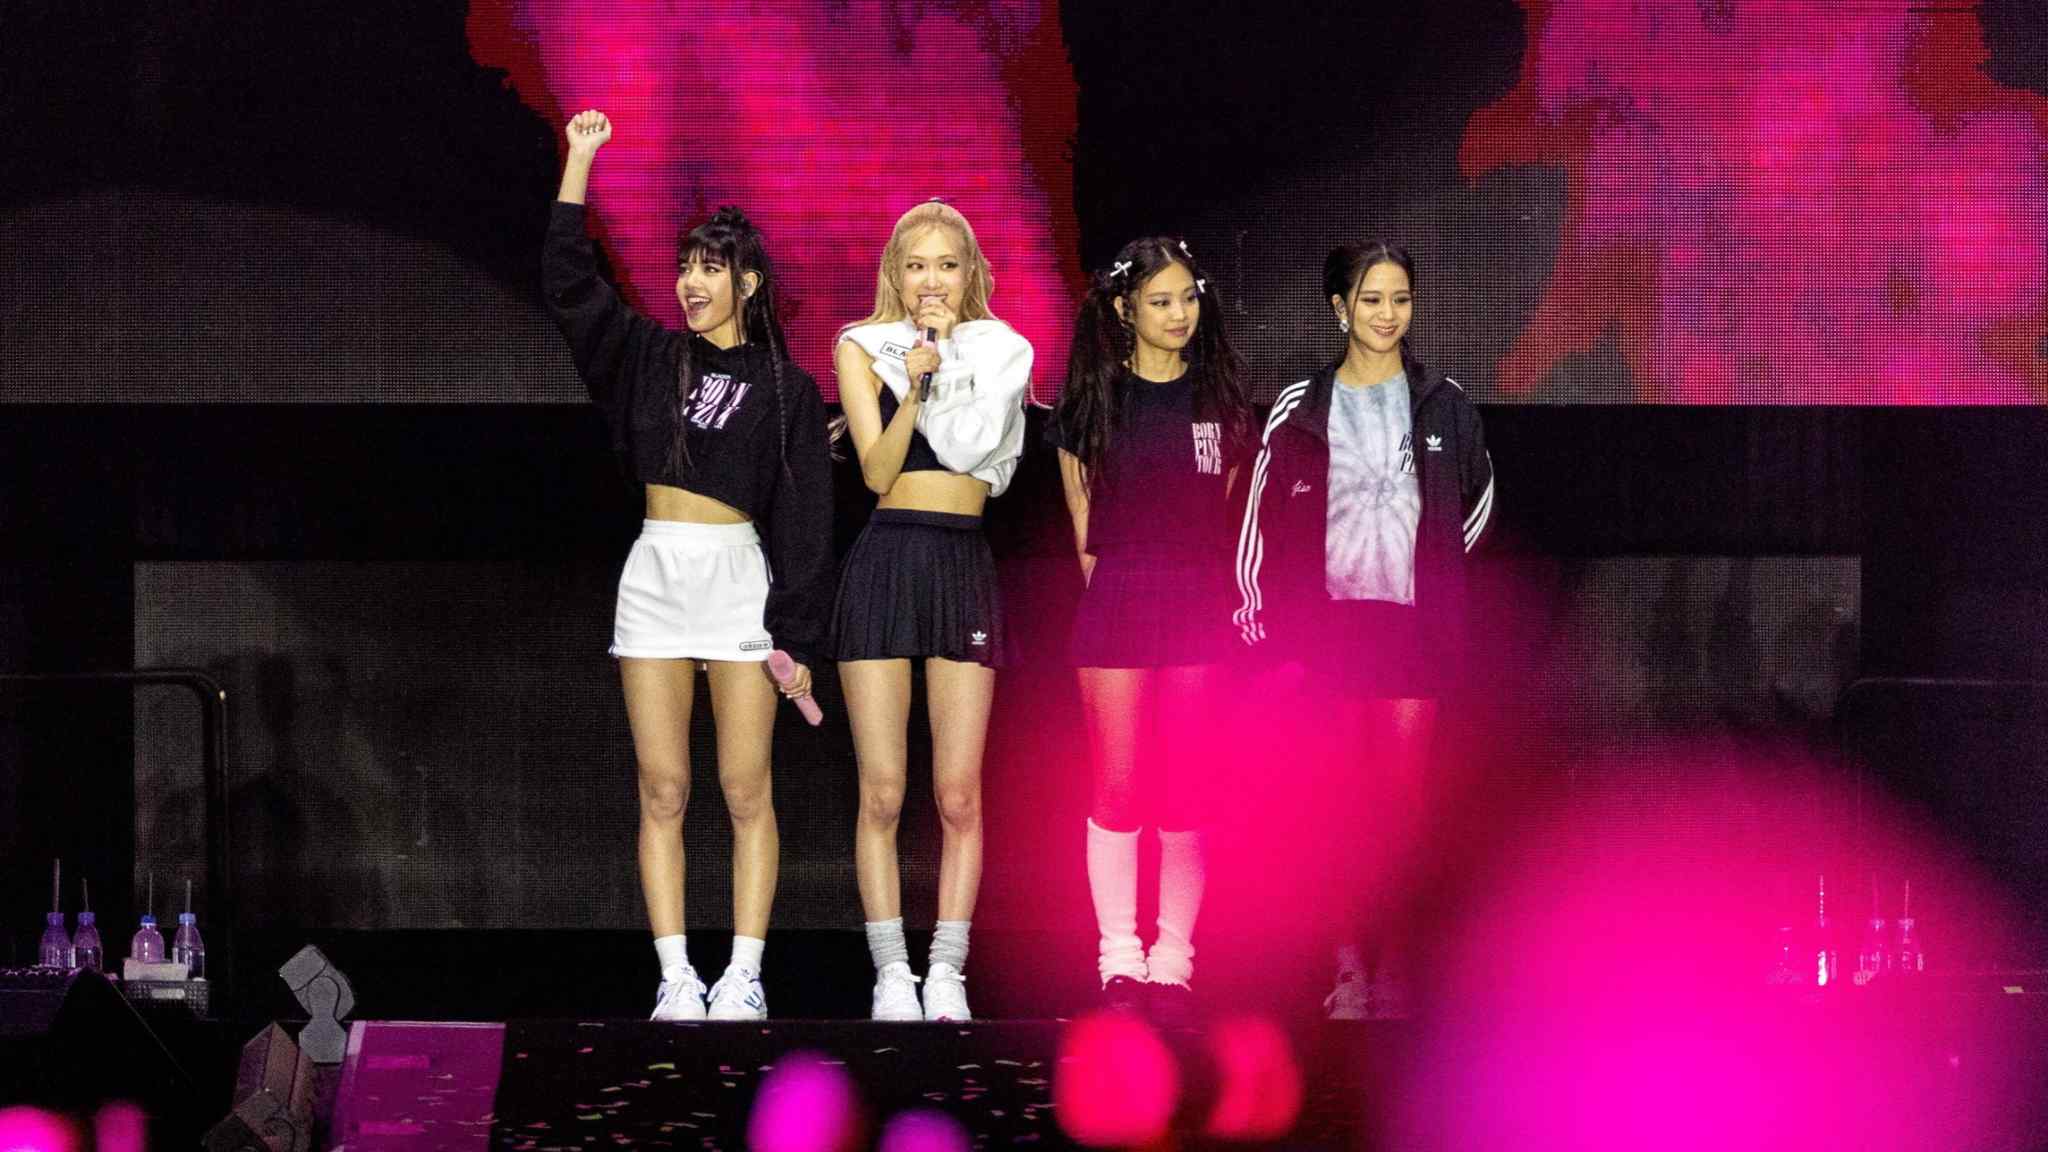 Blackpink — all-conquering K-pop girl group captivate London’s O2 Arena